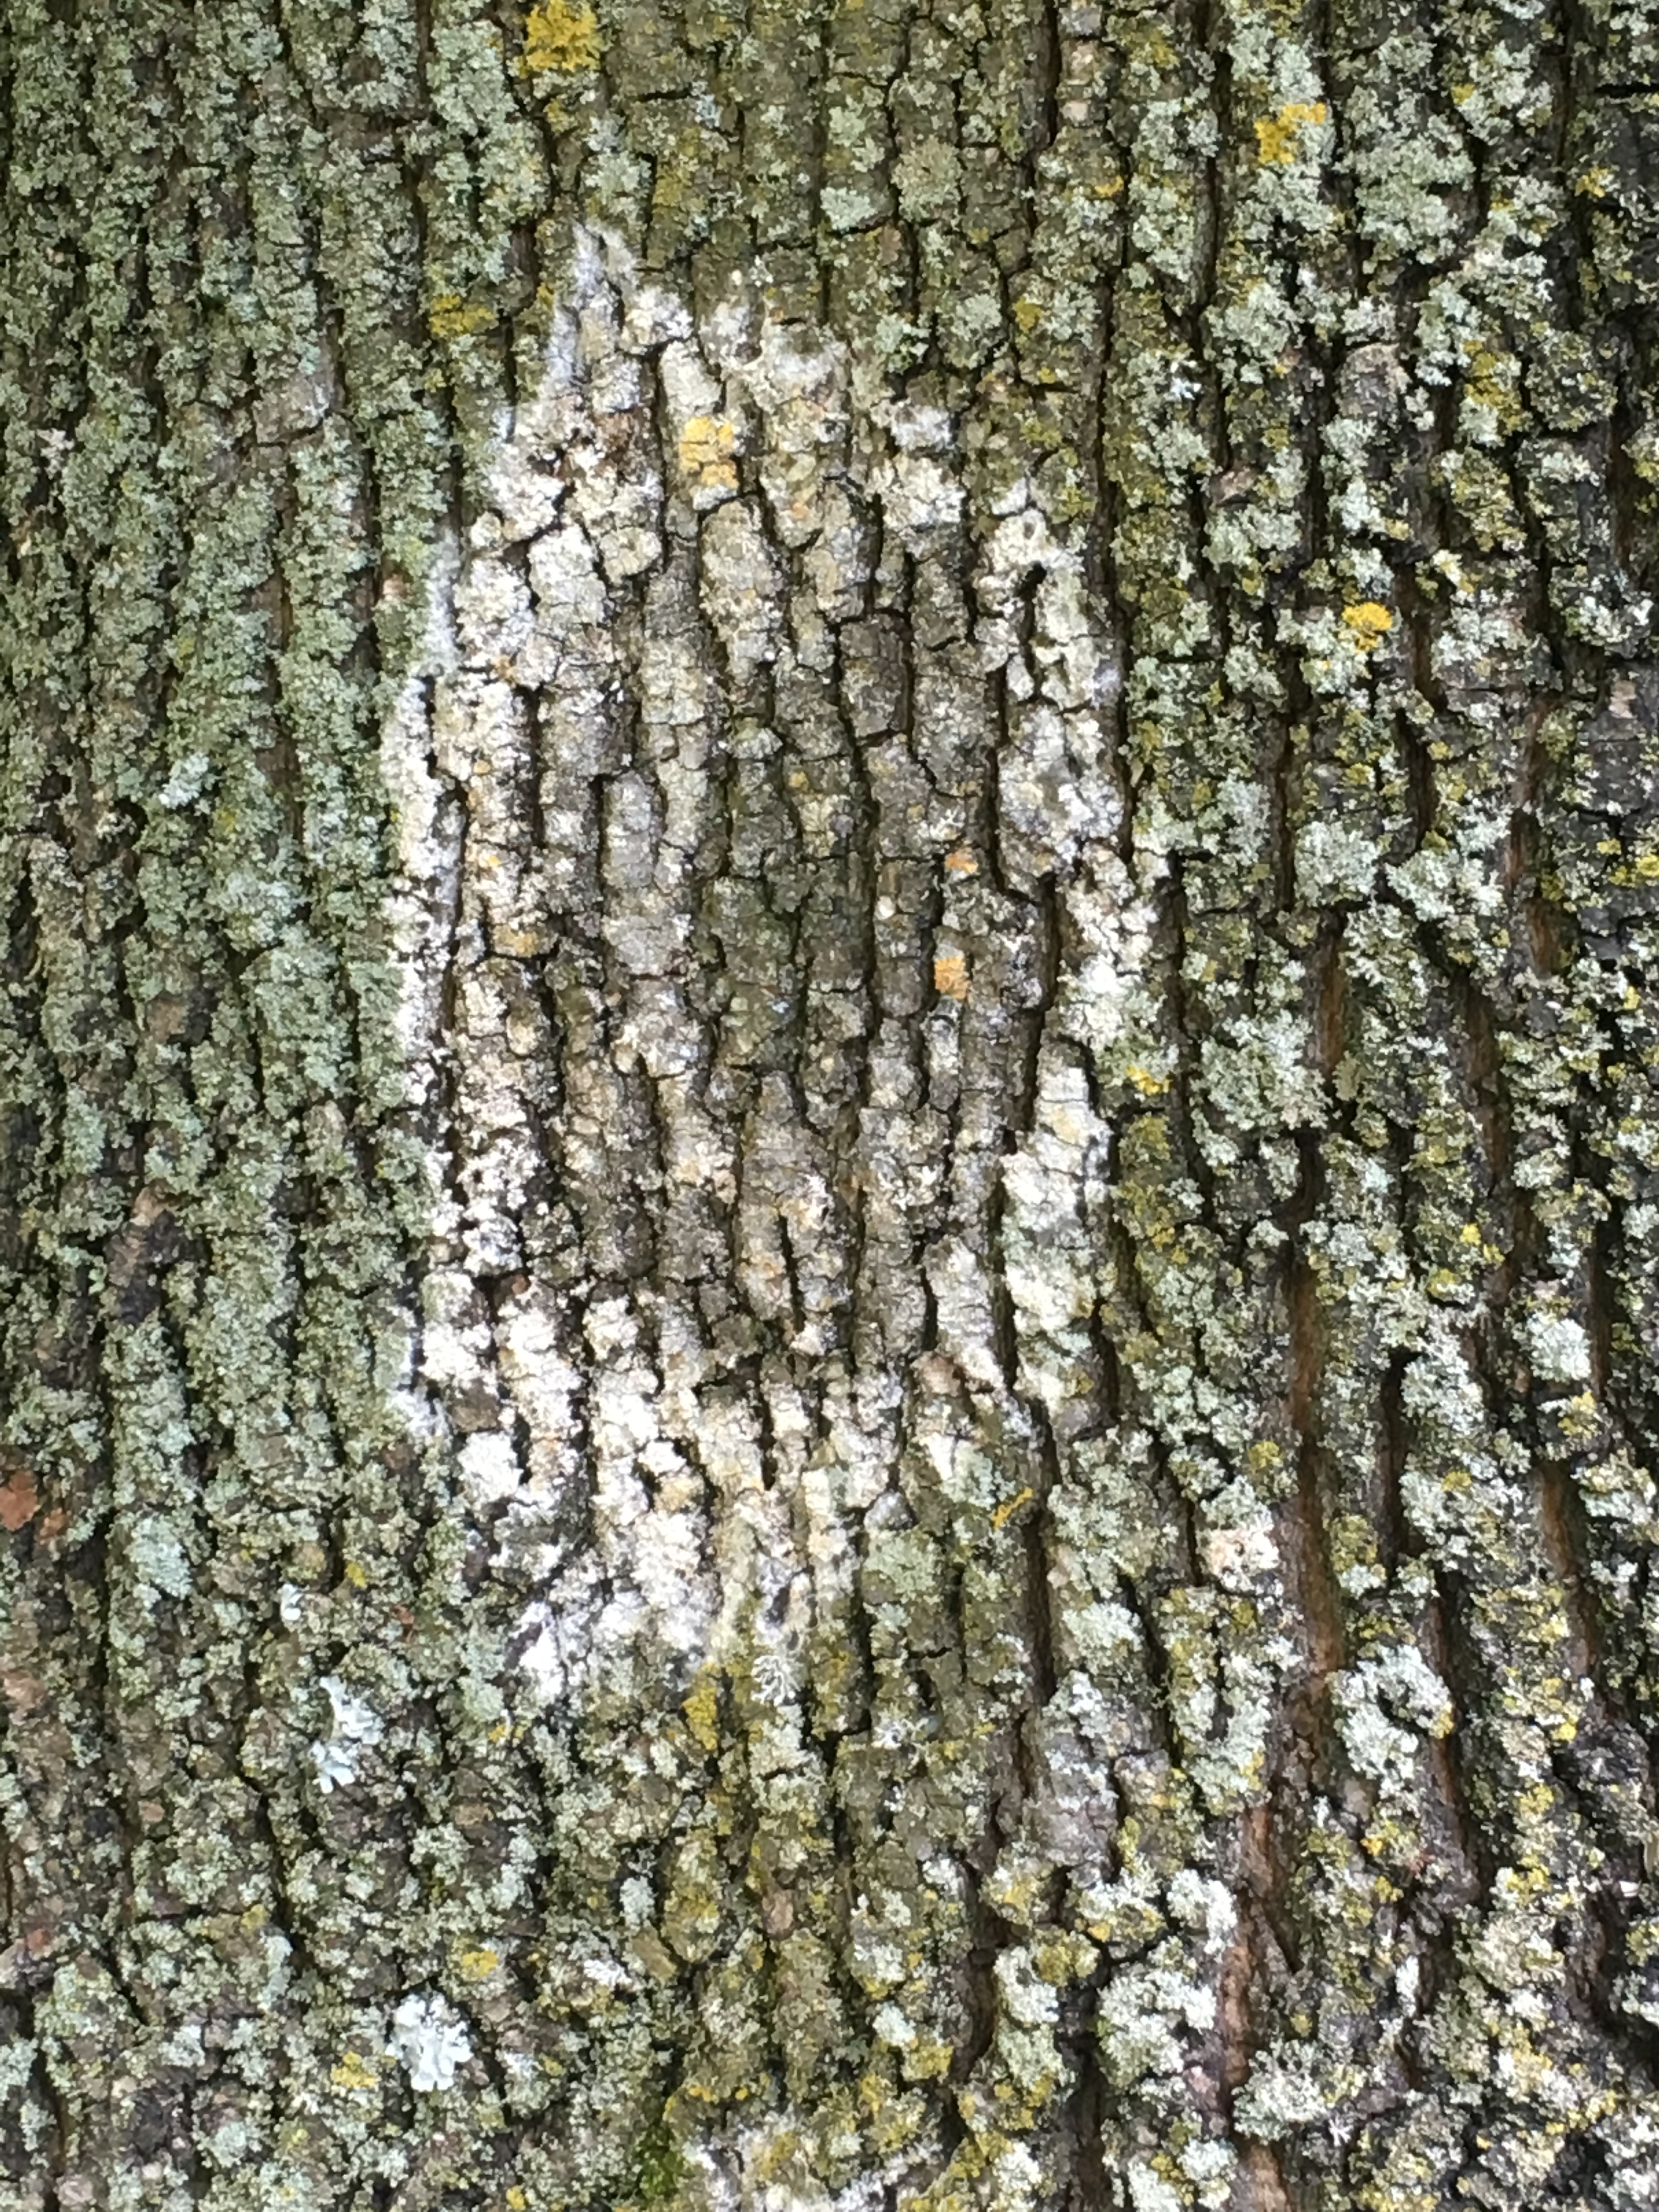 White Rings On Trunk Of Maple Tree Ask Extension